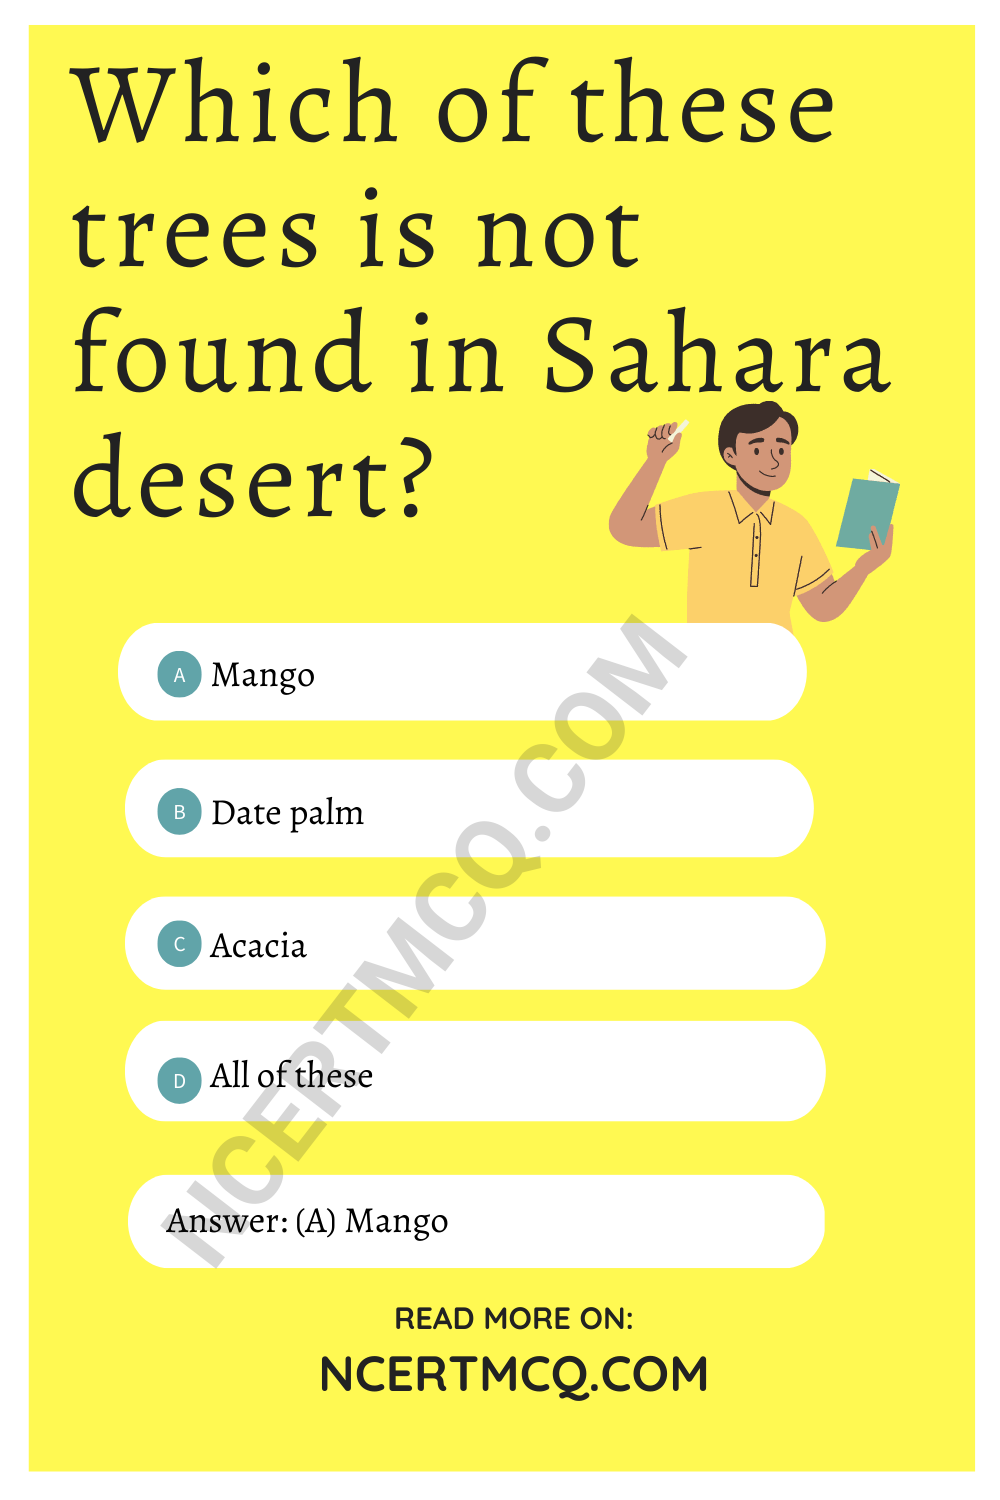 Which of these trees is not found in Sahara desert?